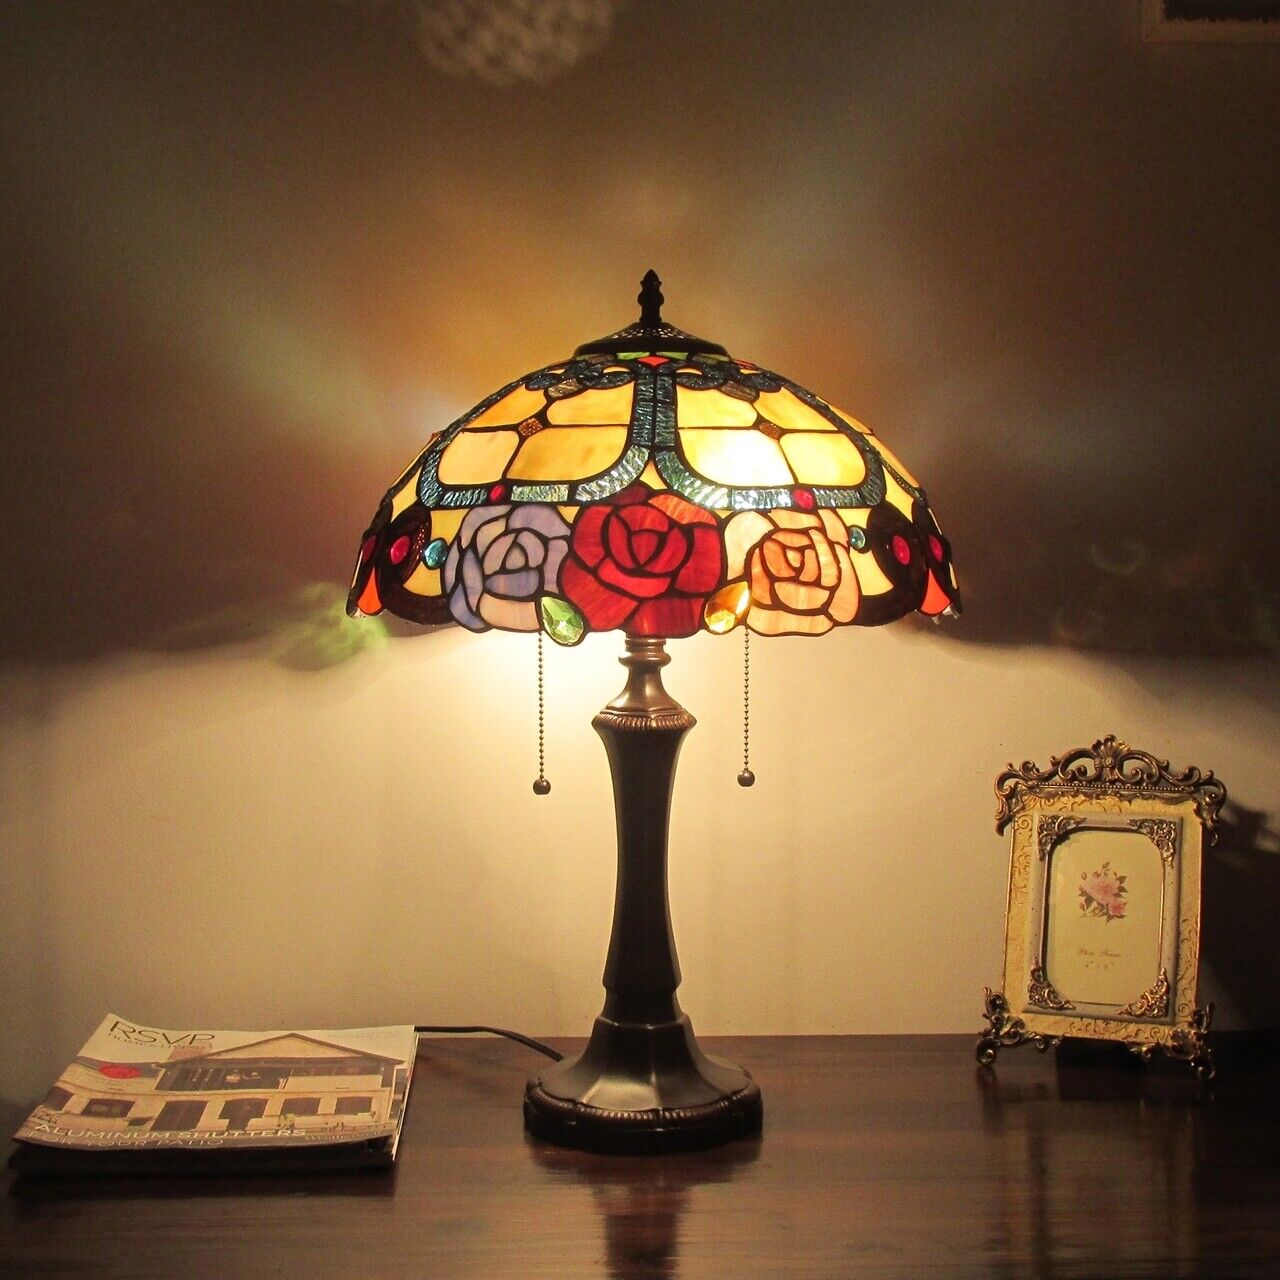 22" Antique Vintage Style Floral Rose Stained Glass Table Lamp